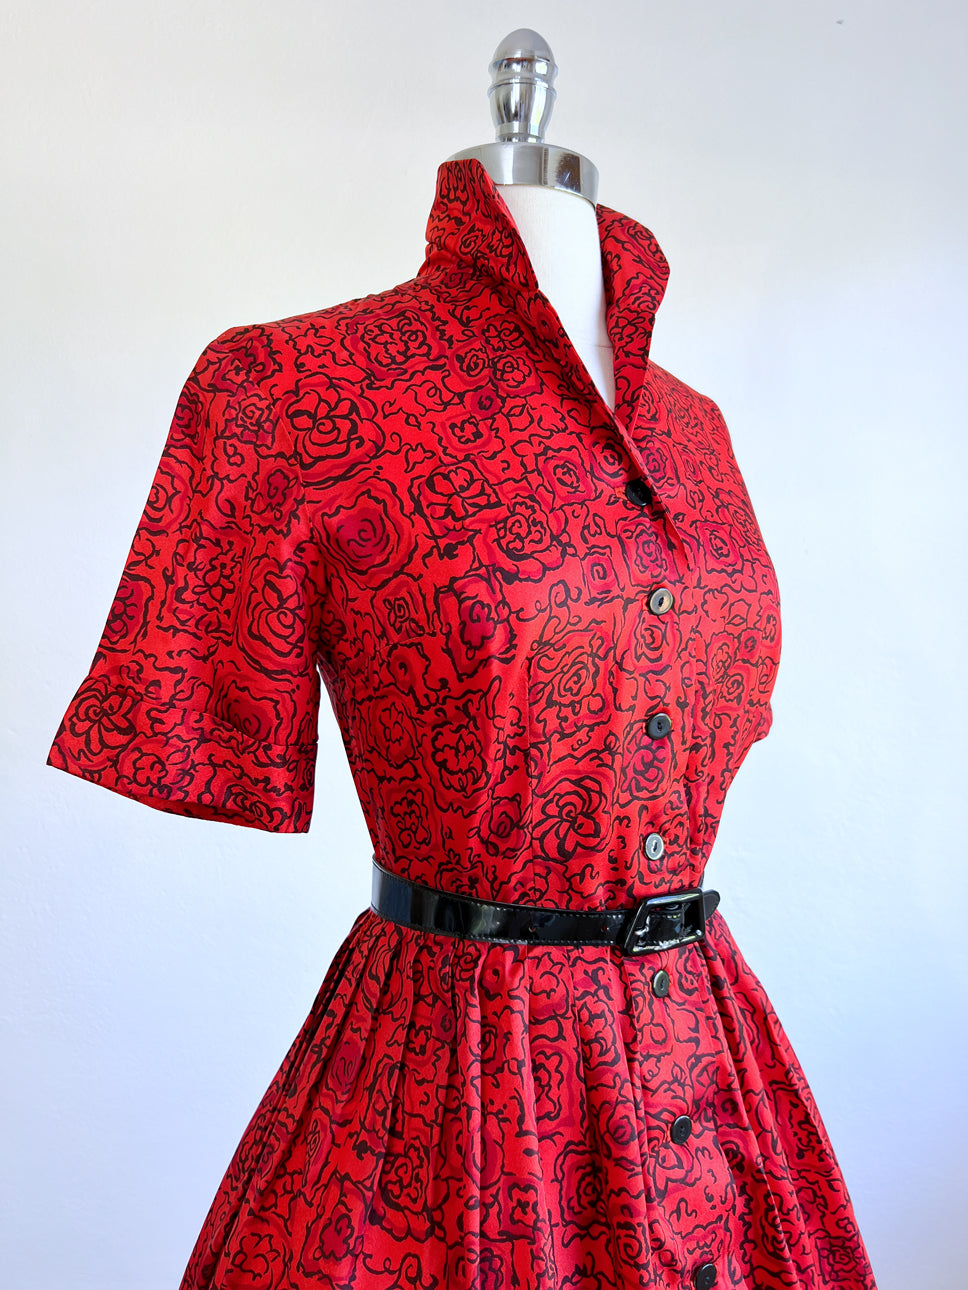 Vintage 1960s Dress - VIVID Scarlet Red + Black Abstracted Rose Print Shirtwaist w Buttons to the Hem! Size M